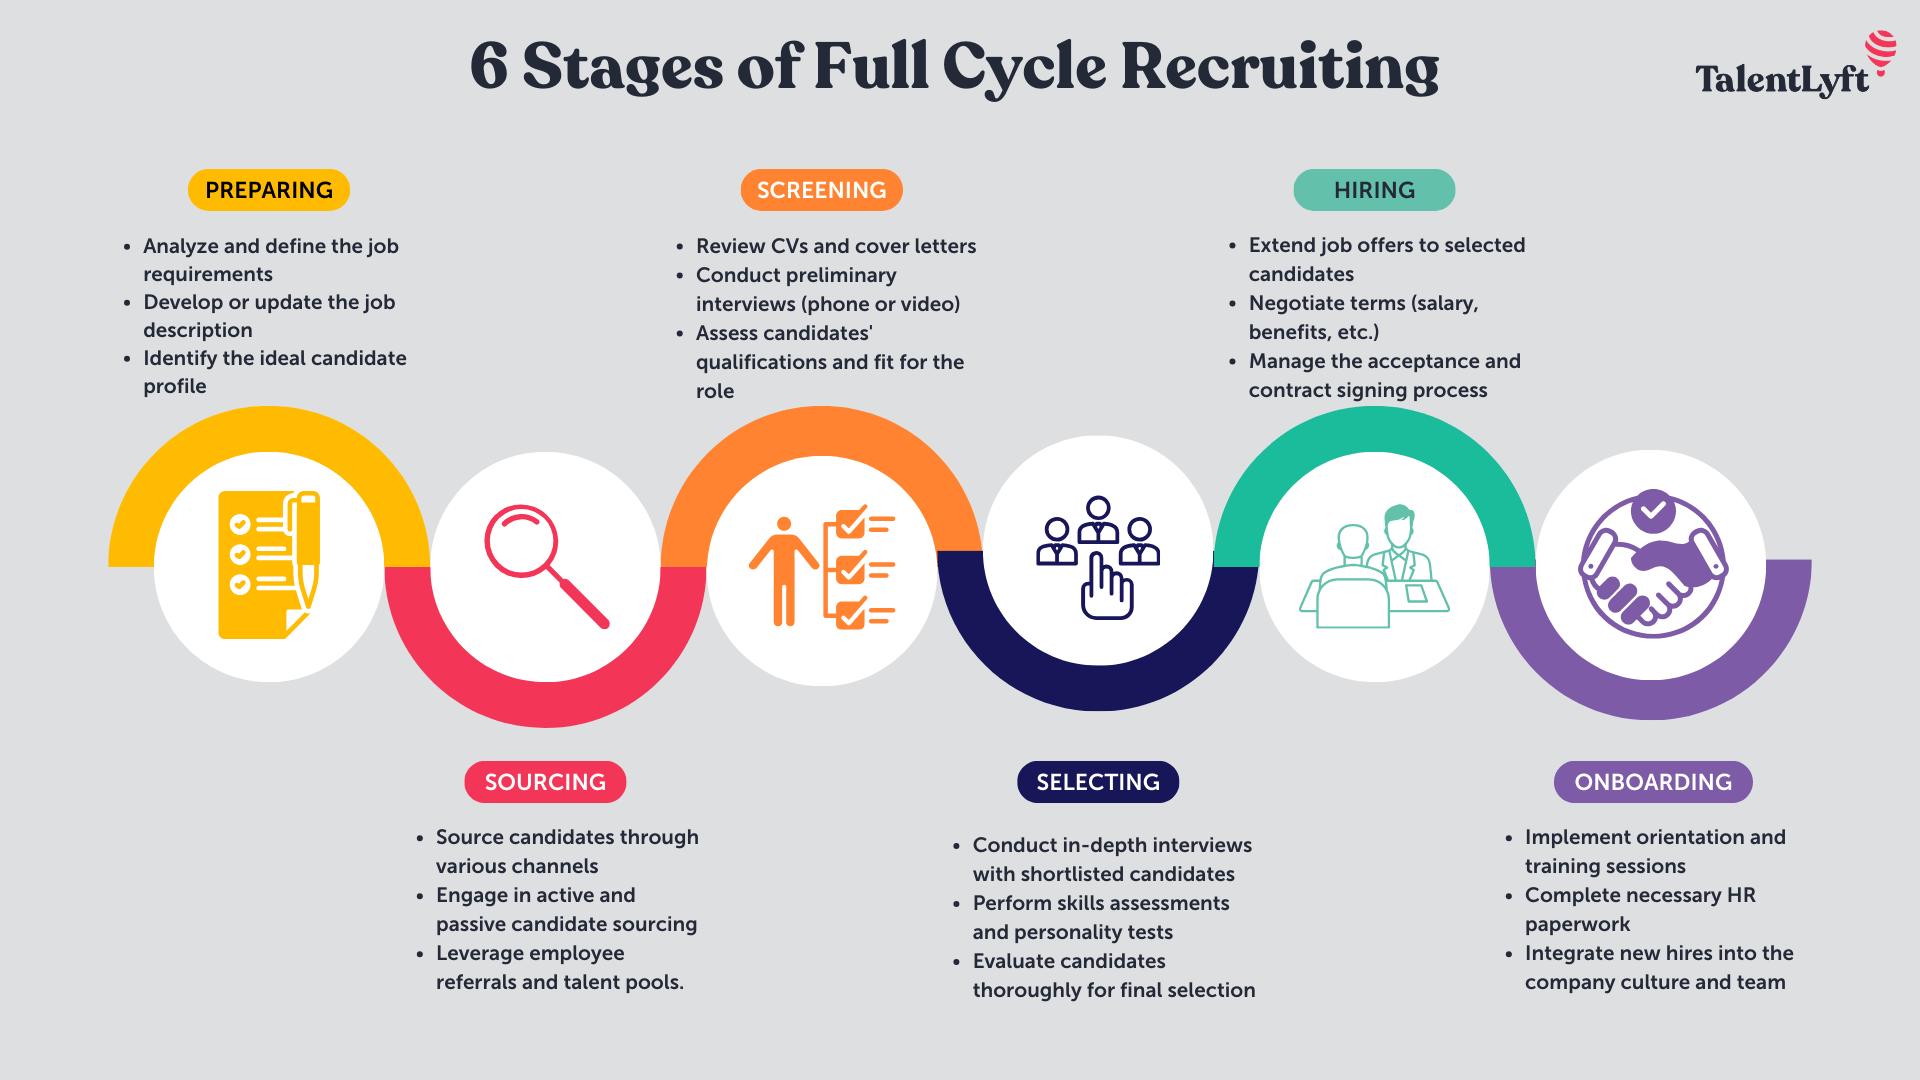 Full Life Cycle Recruiting